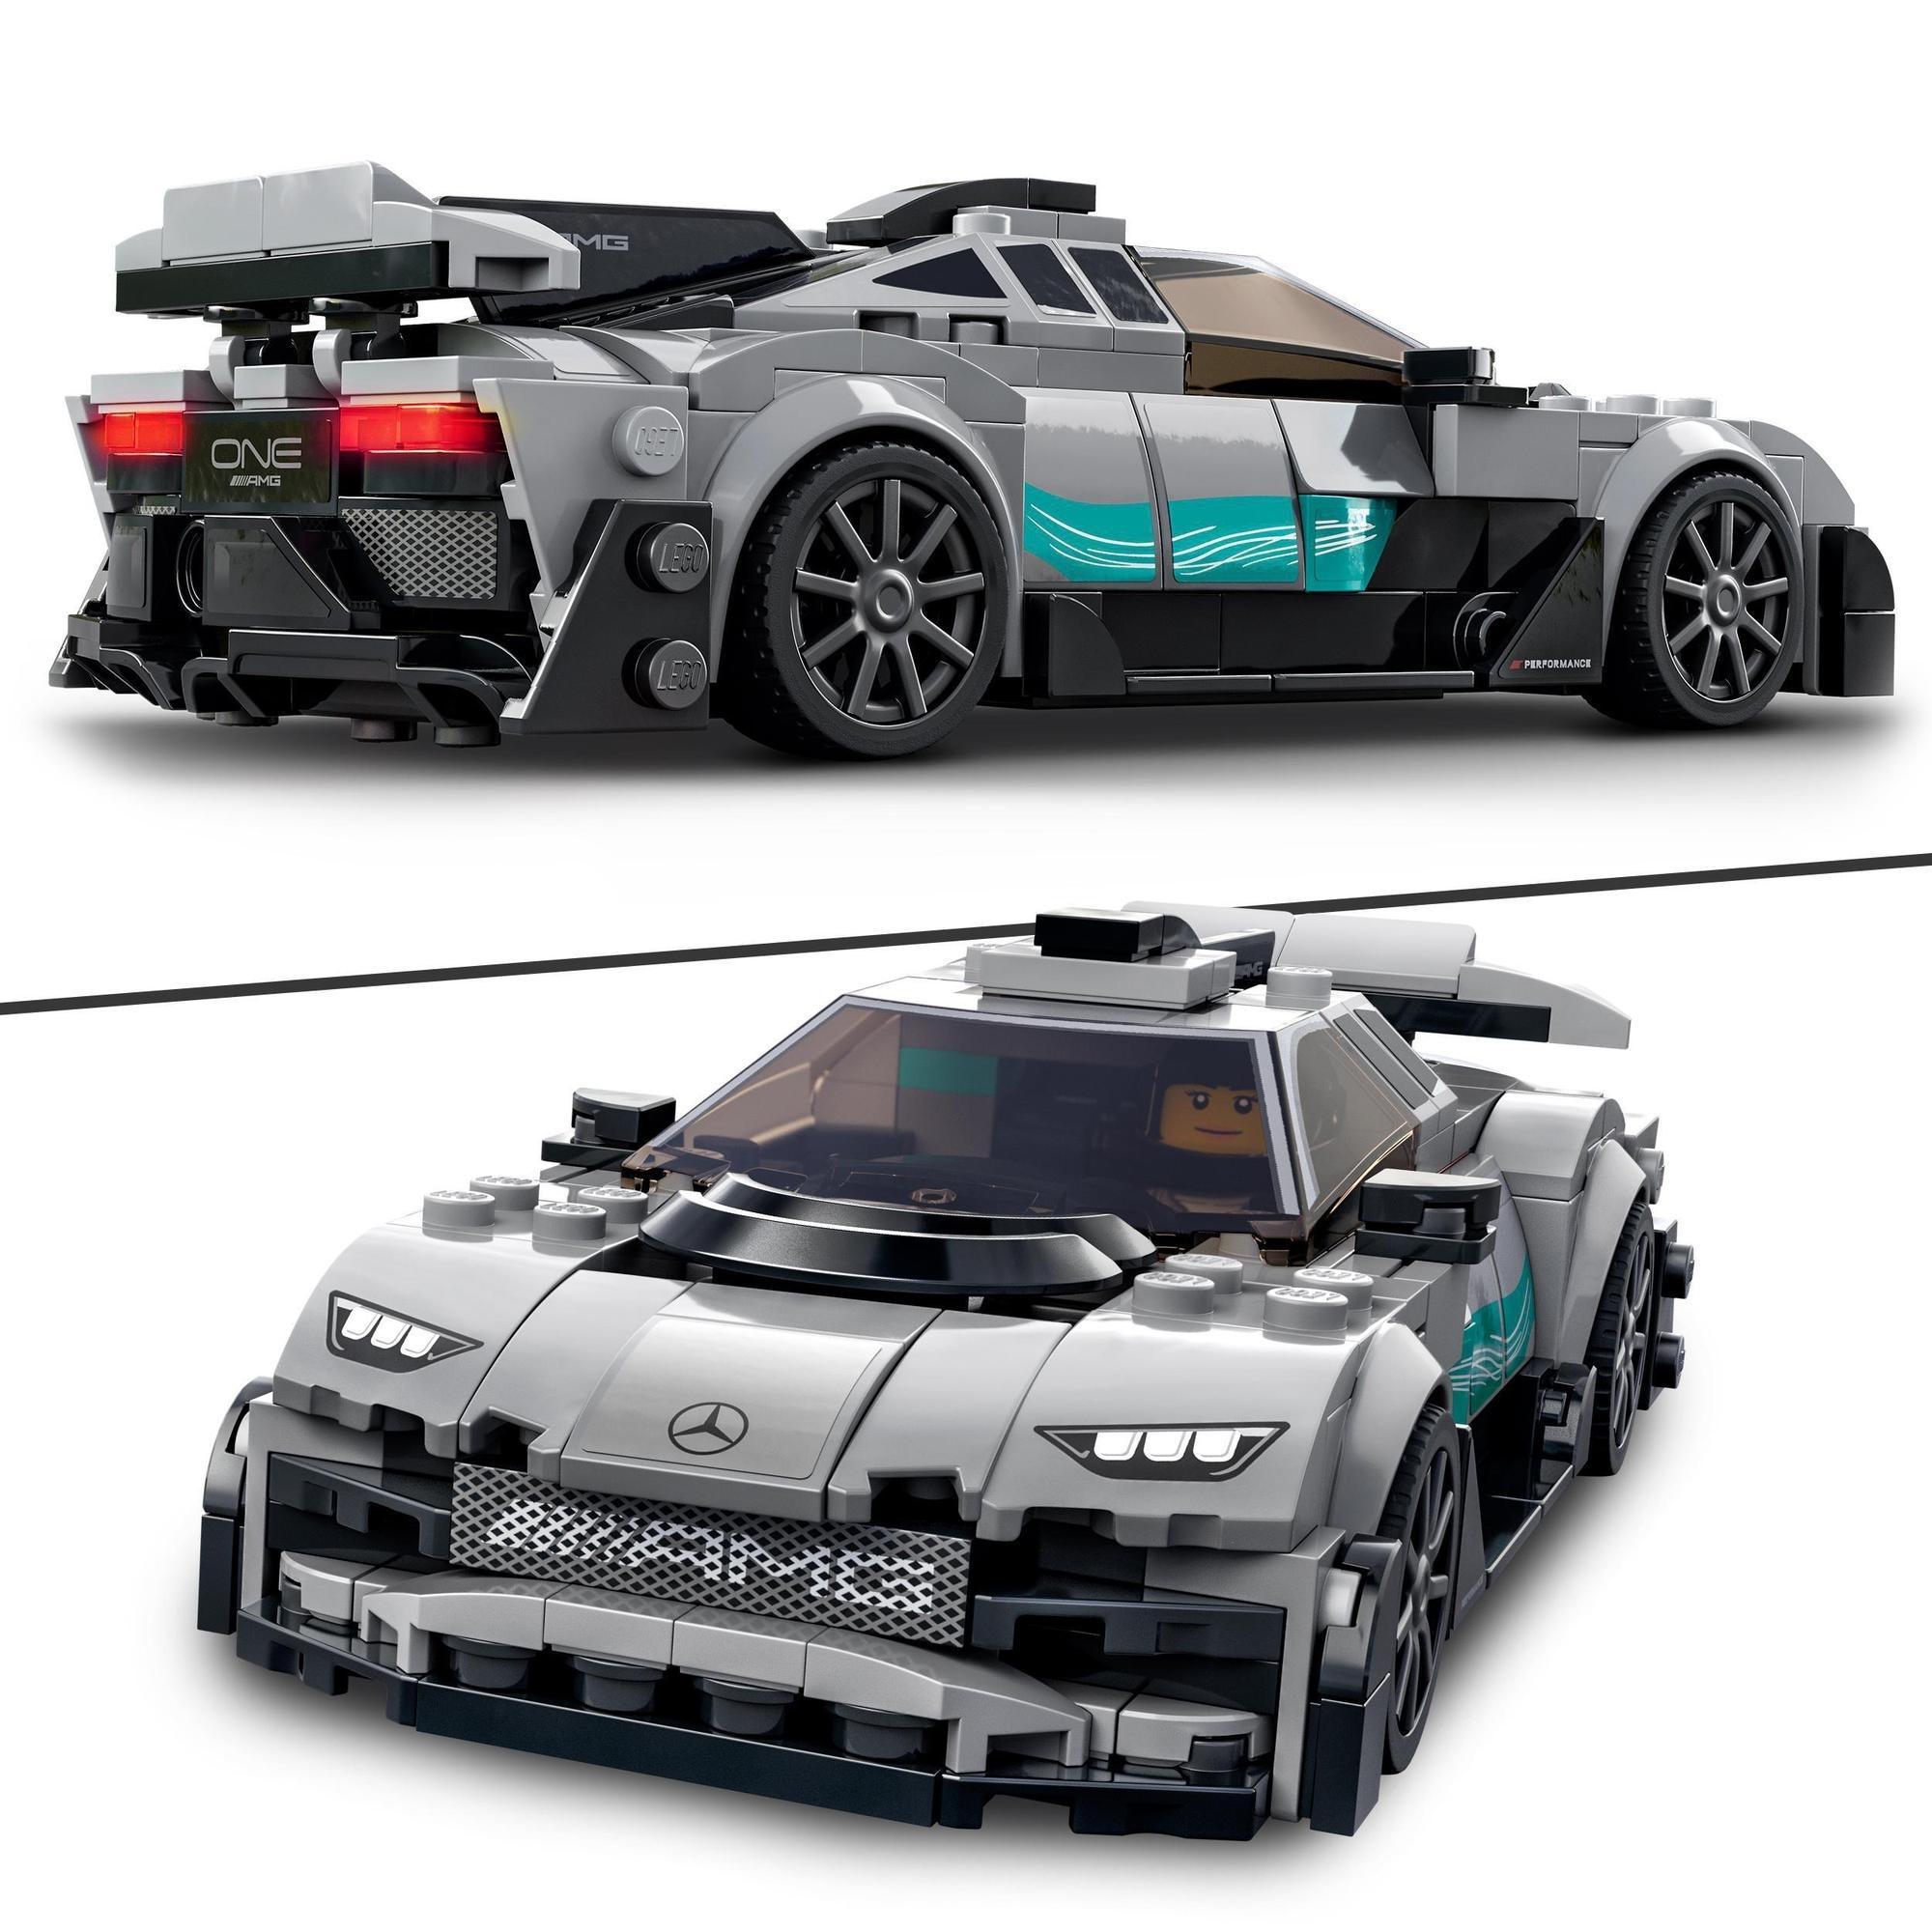 LEGO Speed Champions 76909 Siêu Xe Mercedes-AMG F1 W12 E Performance & Mercedes-AMG Project One (564 chi tiết)